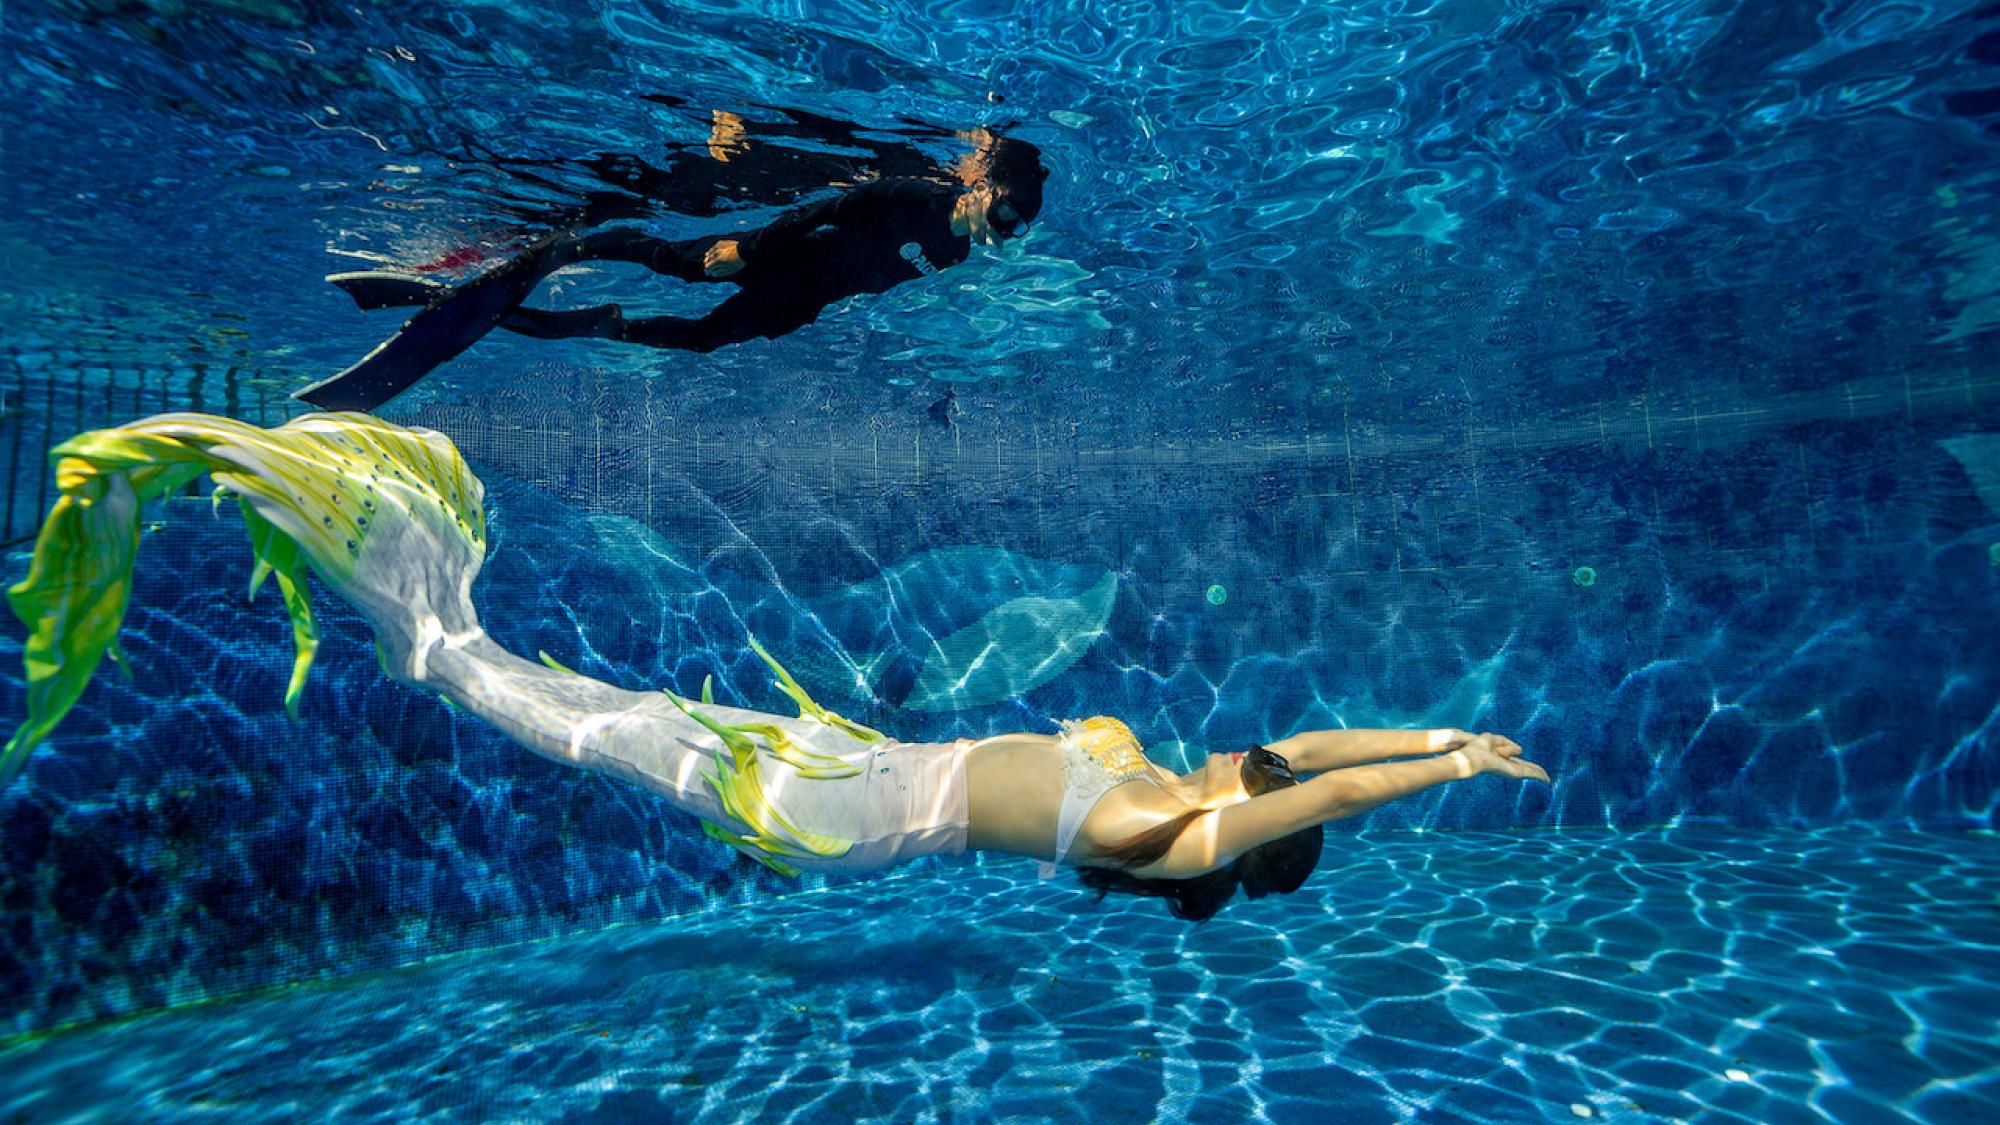 Padi mermaid instructor swimming underwater with a safety diver on the surface